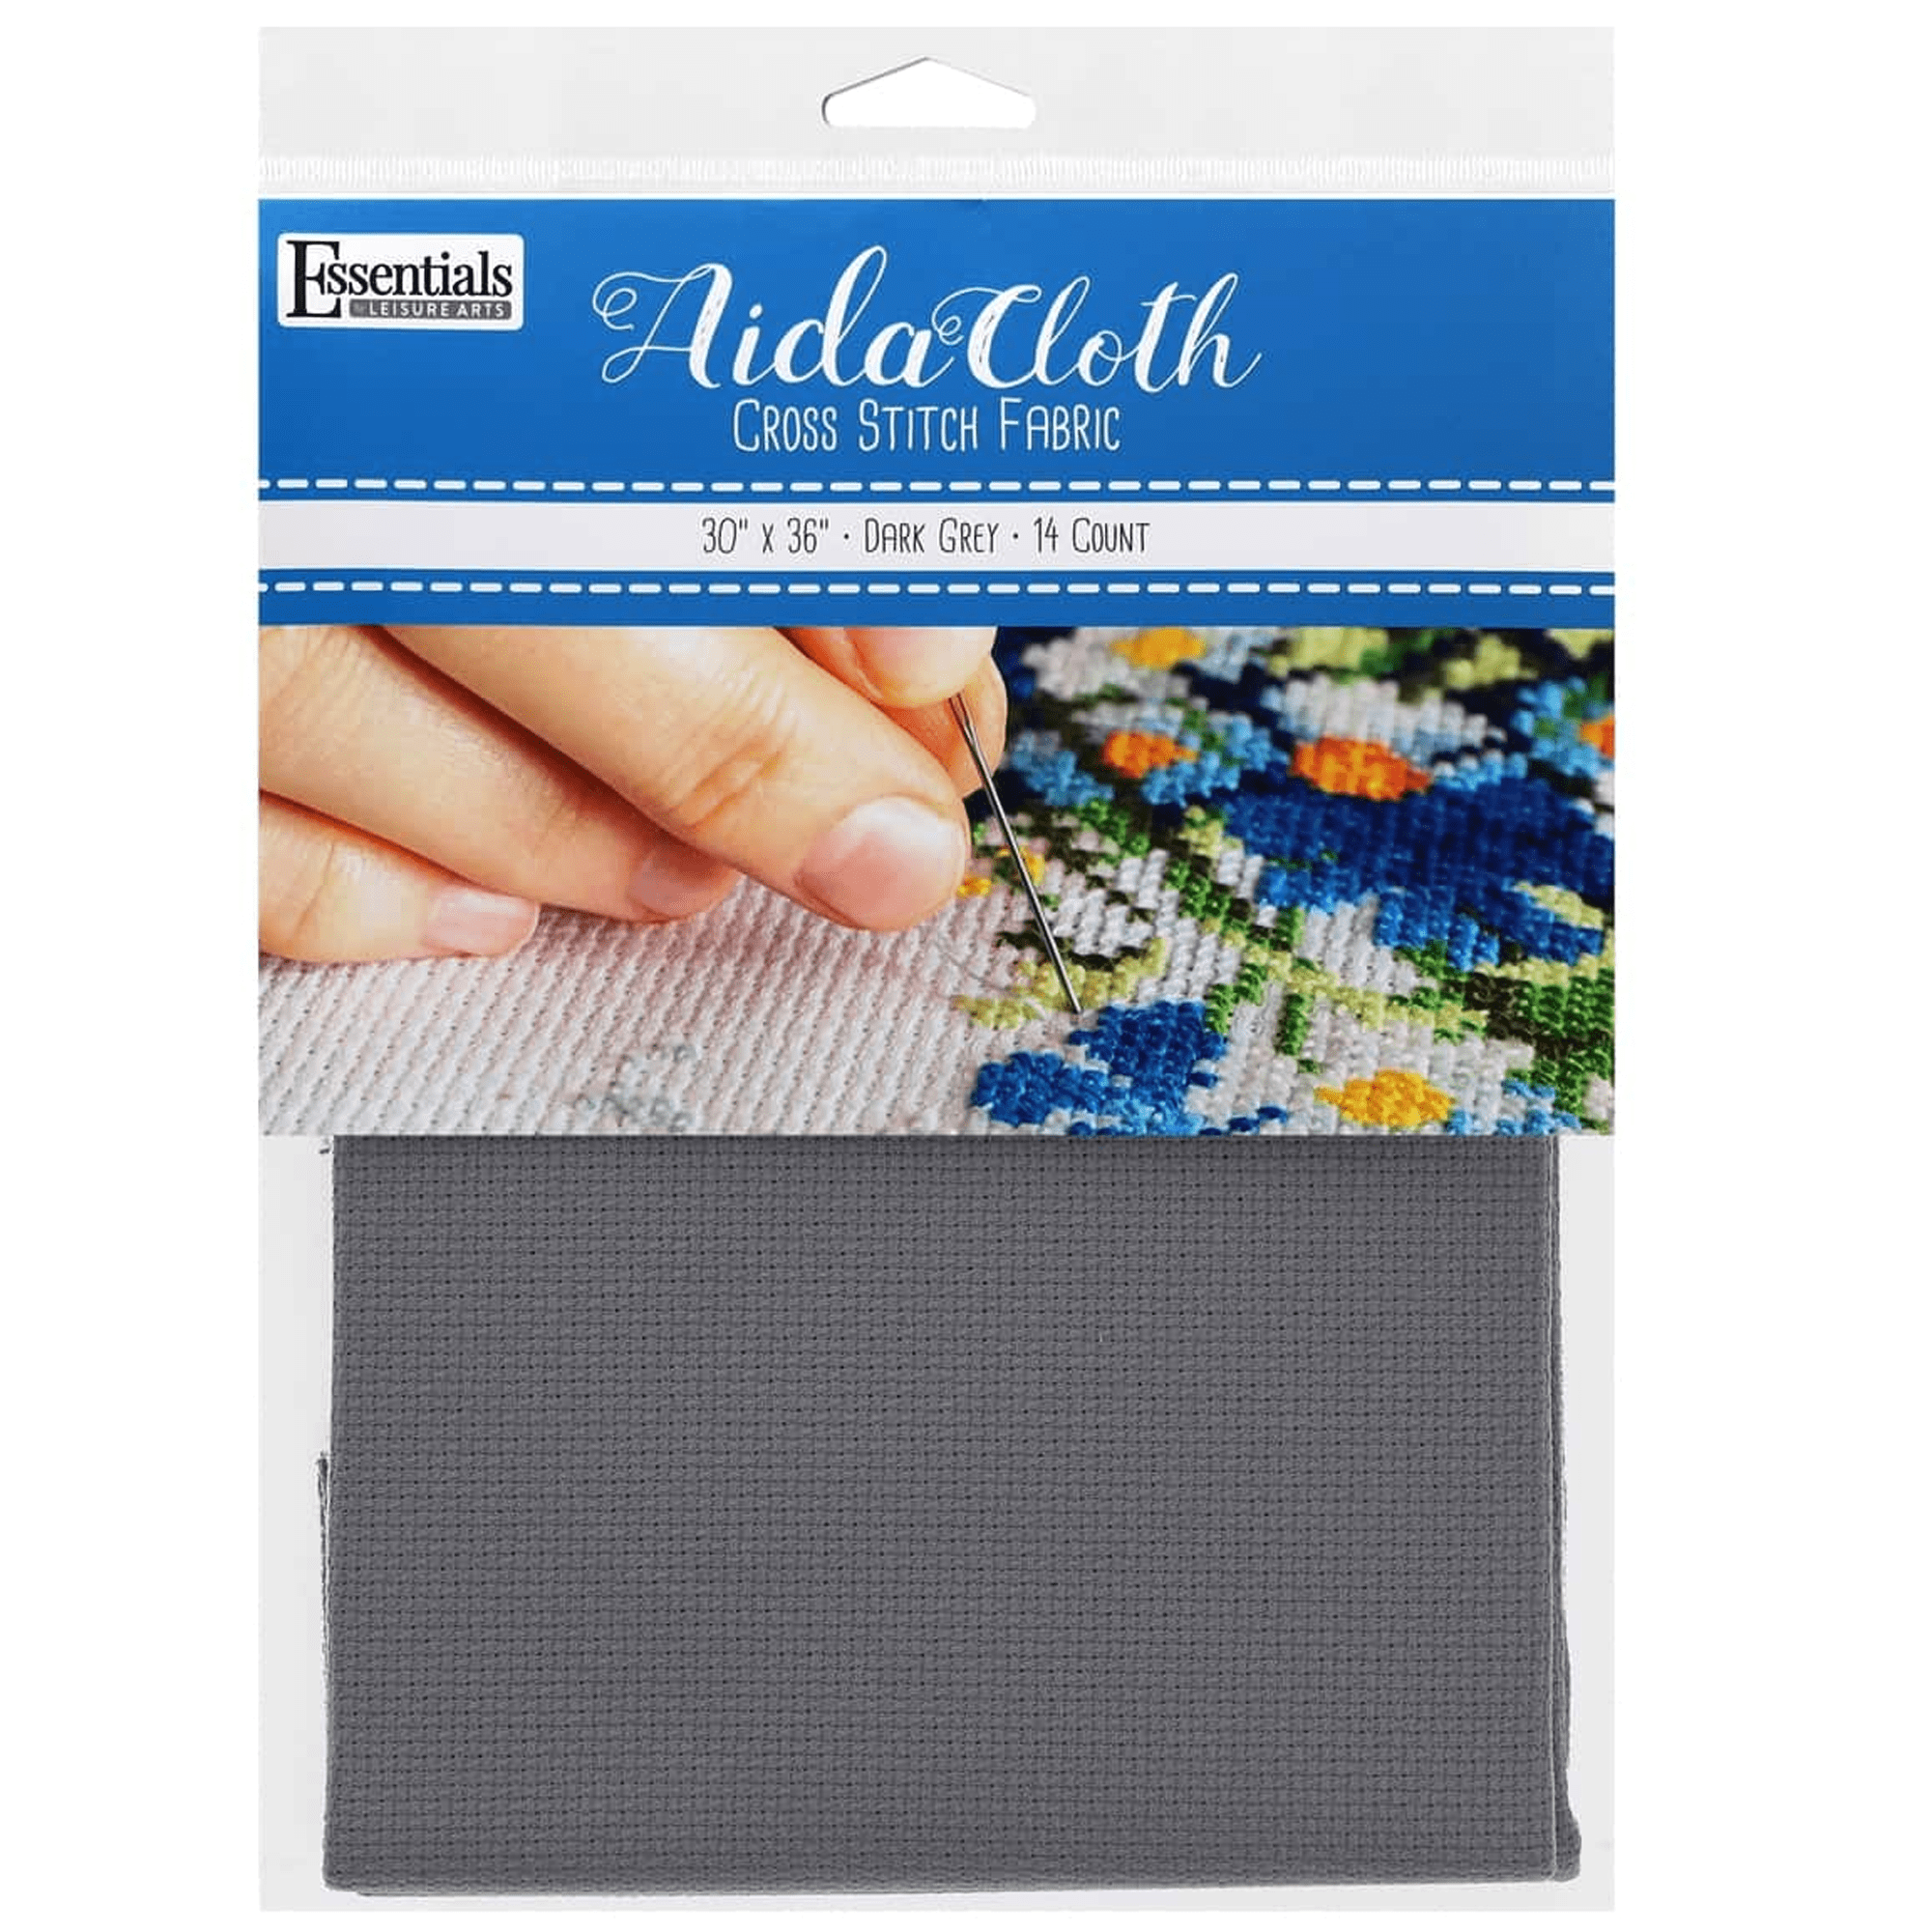 Essentials By Leisure Arts Aida Cloth, 14 count, 30 x 36, Dark Grey cross  stitch fabric for embroidery, cross stitch, machine embroidery and  needlepoint 